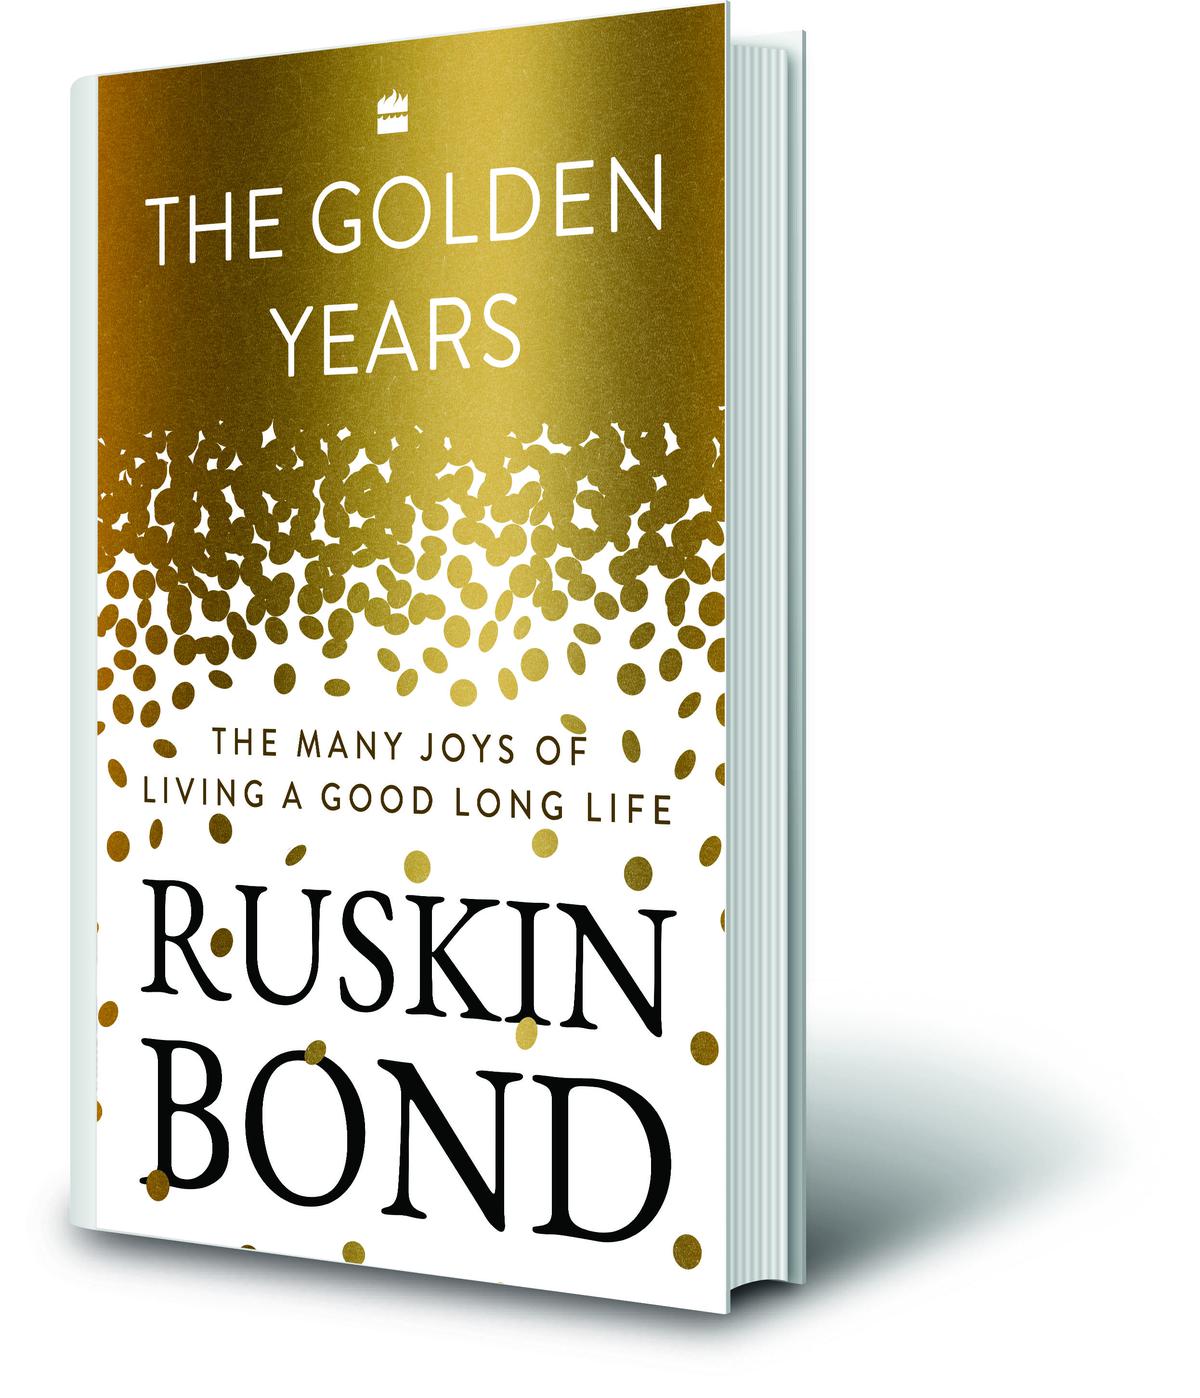 book review of any book of ruskin bond